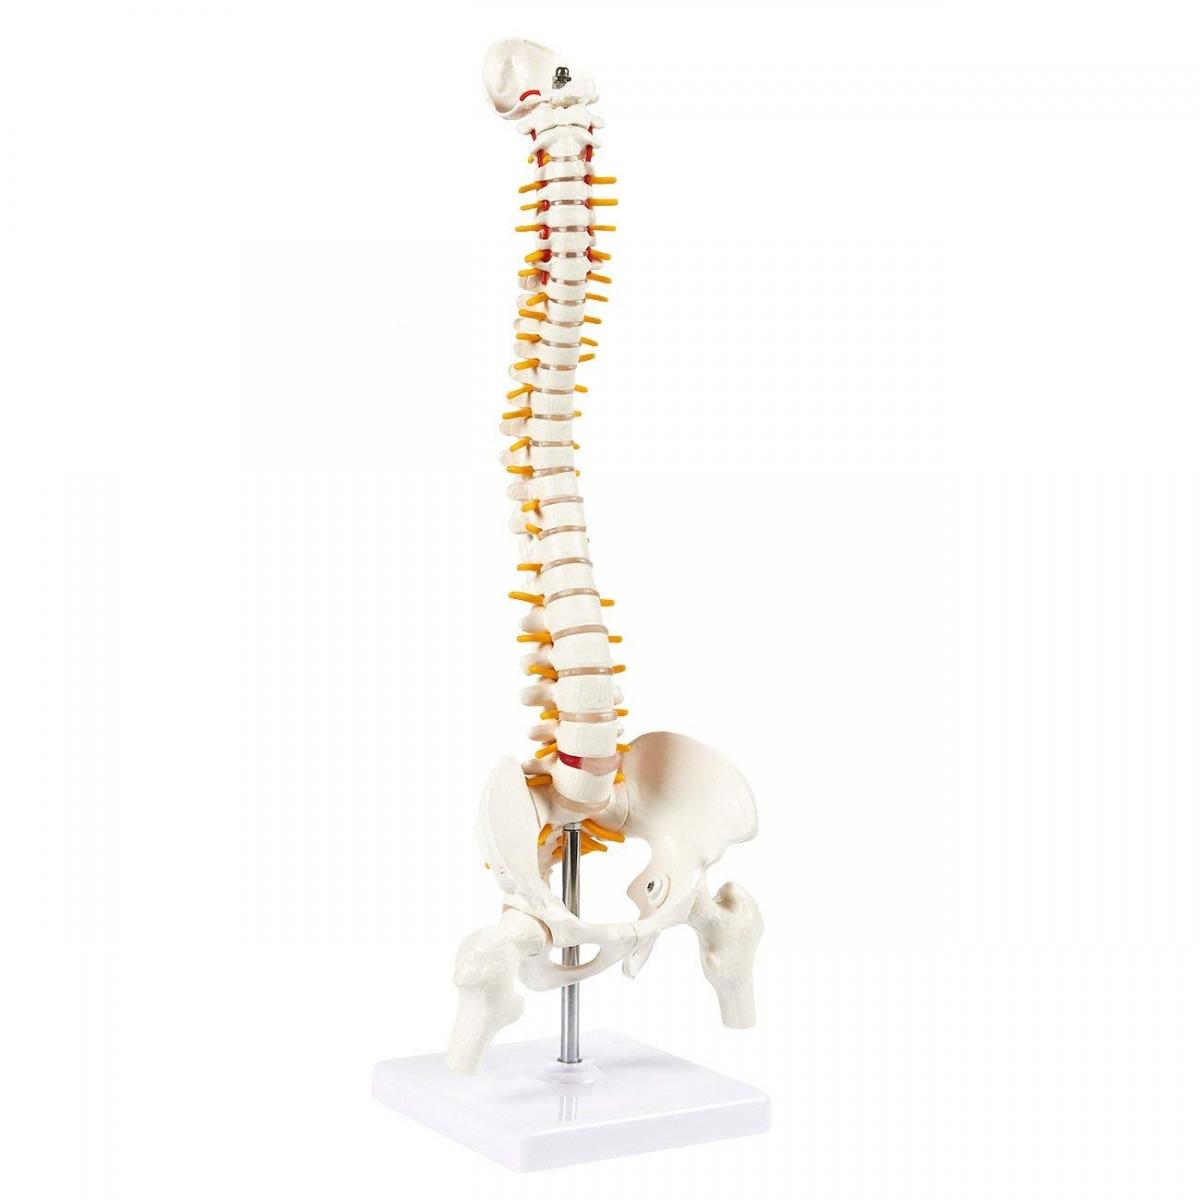 Vertabrae and Spinal Cord Model